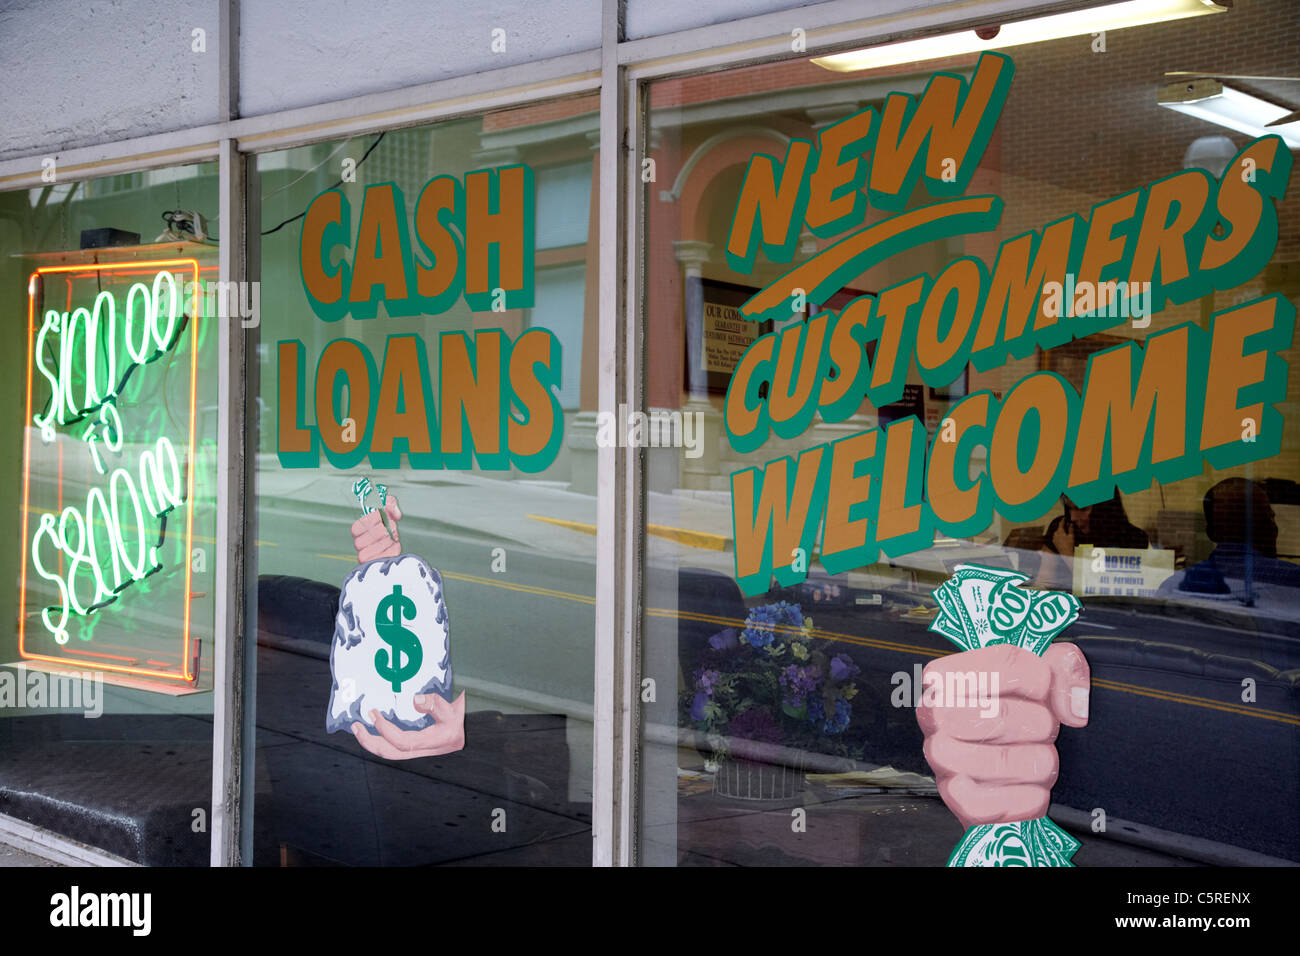 cash loans store in downtown Nashville Tennessee USA Stock Photo